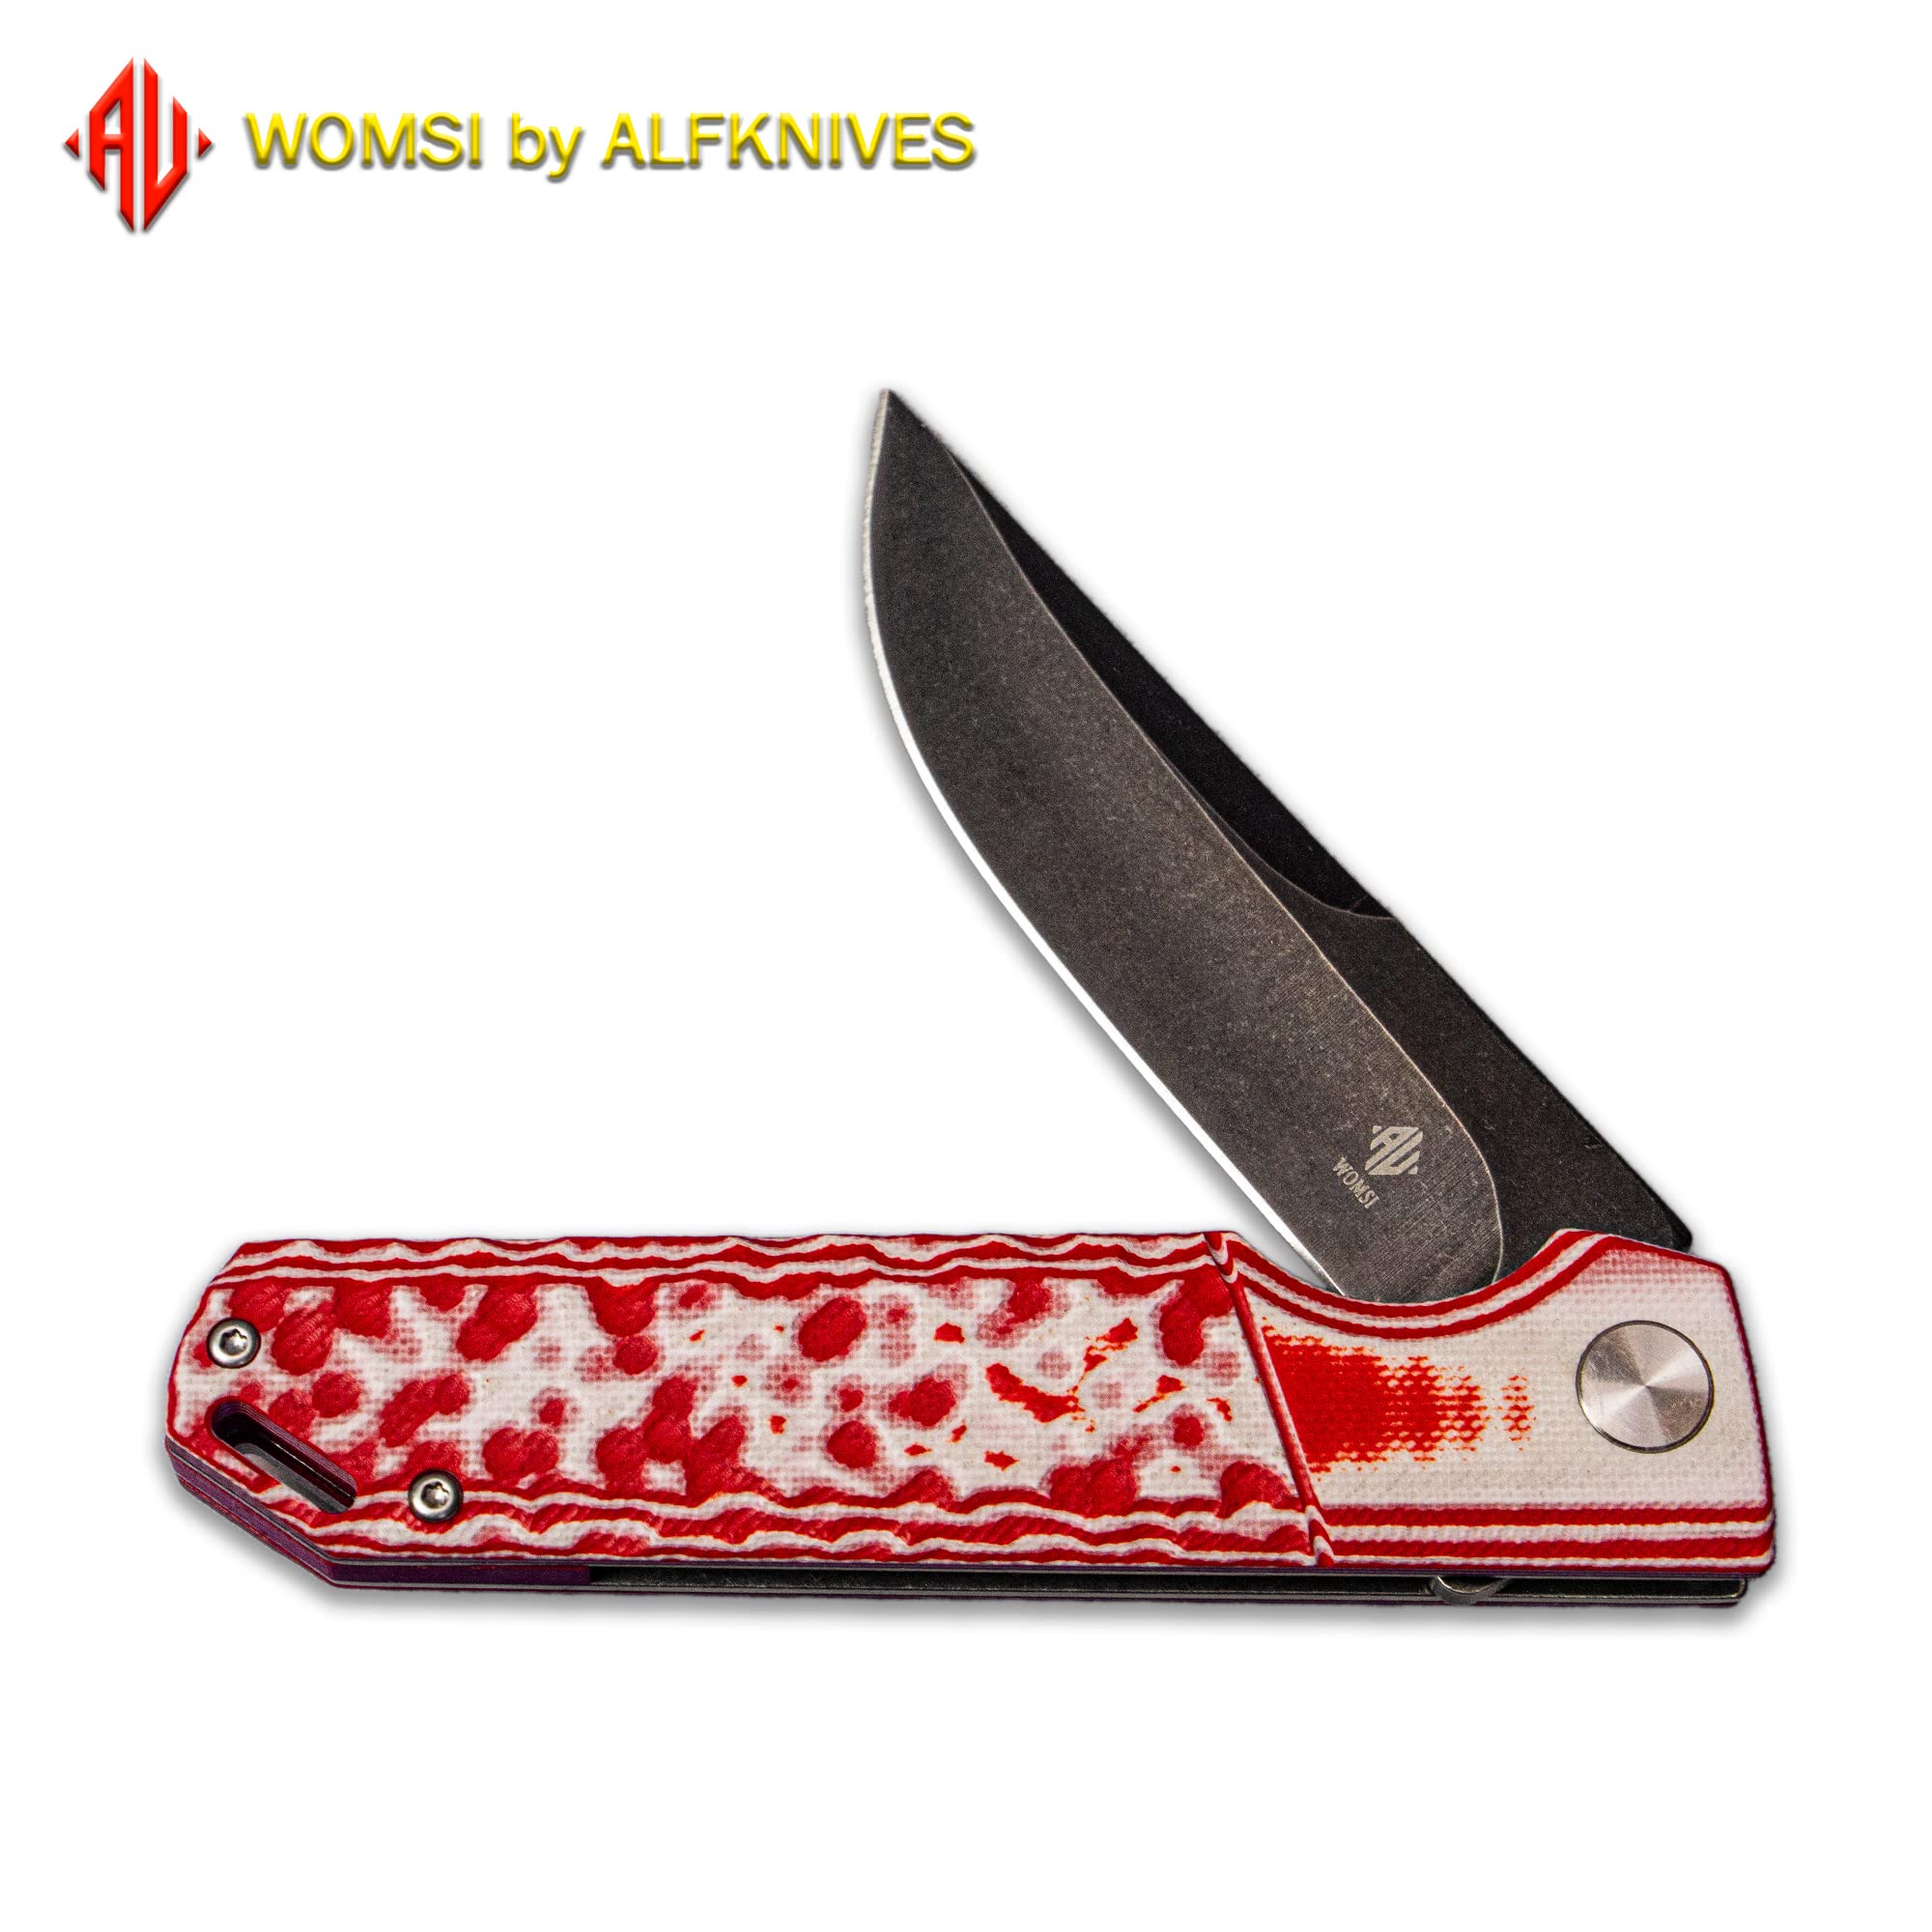 Rema 929 or 930 Skiving Knife - Choose Style: Flexible with Round